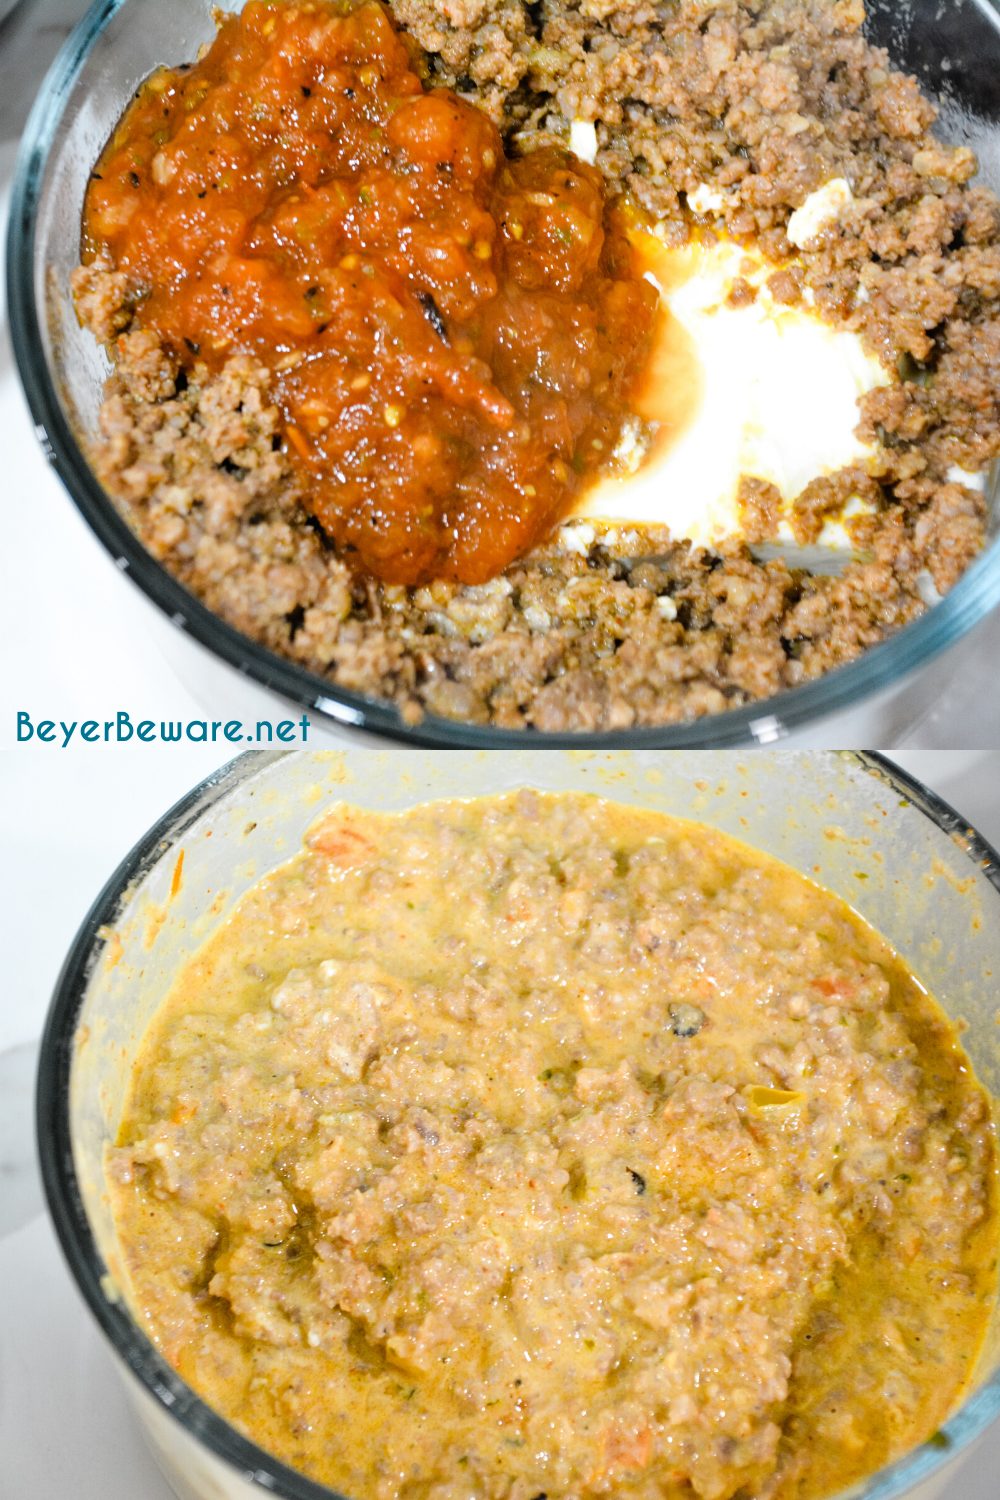 Make creamy taco meat filling by mixing cream cheese and salsa together.